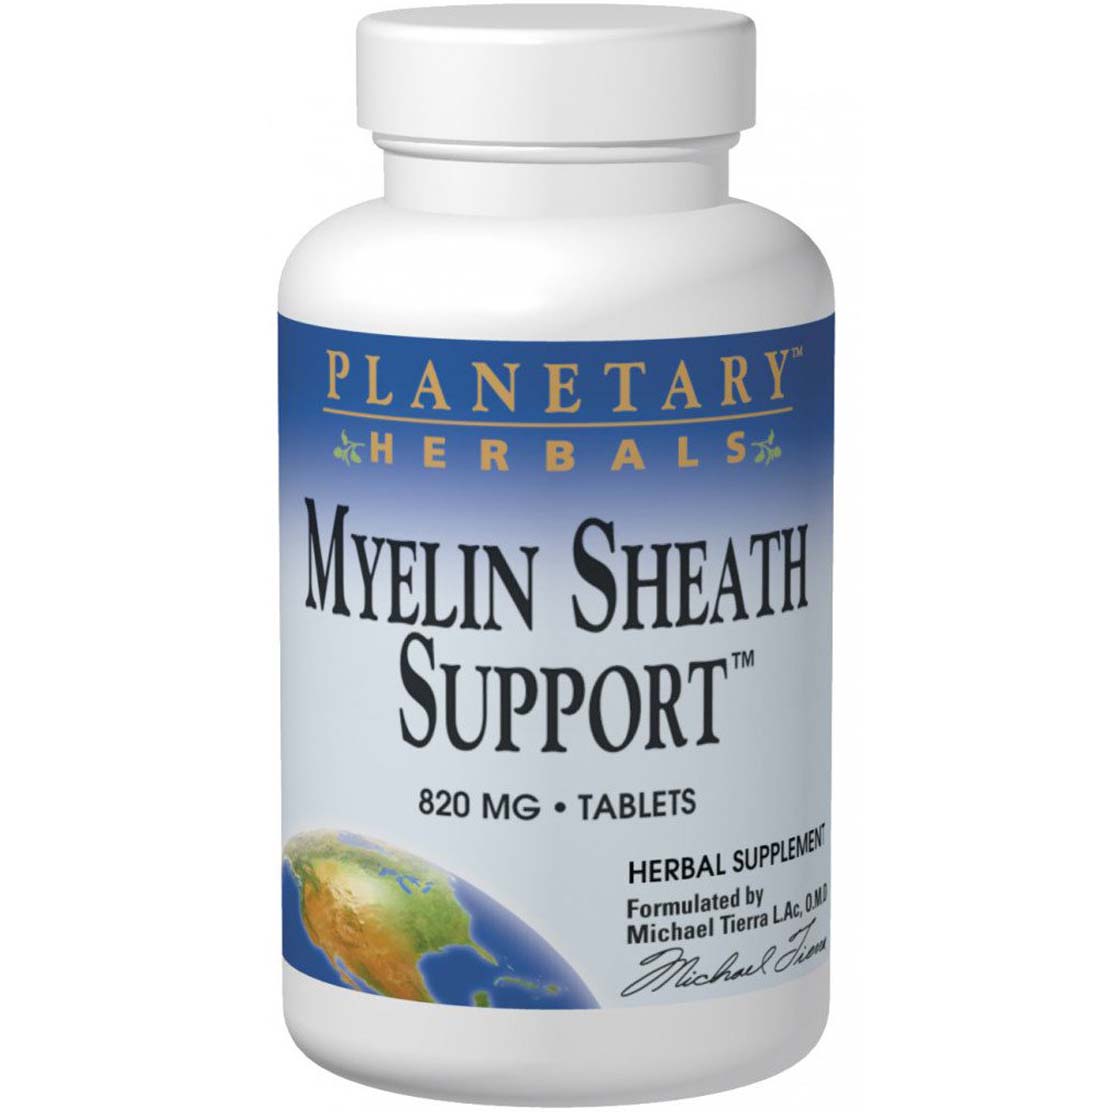 Planetary Herbals Myelin Sheath Support, 820 mg, 90 Tablets